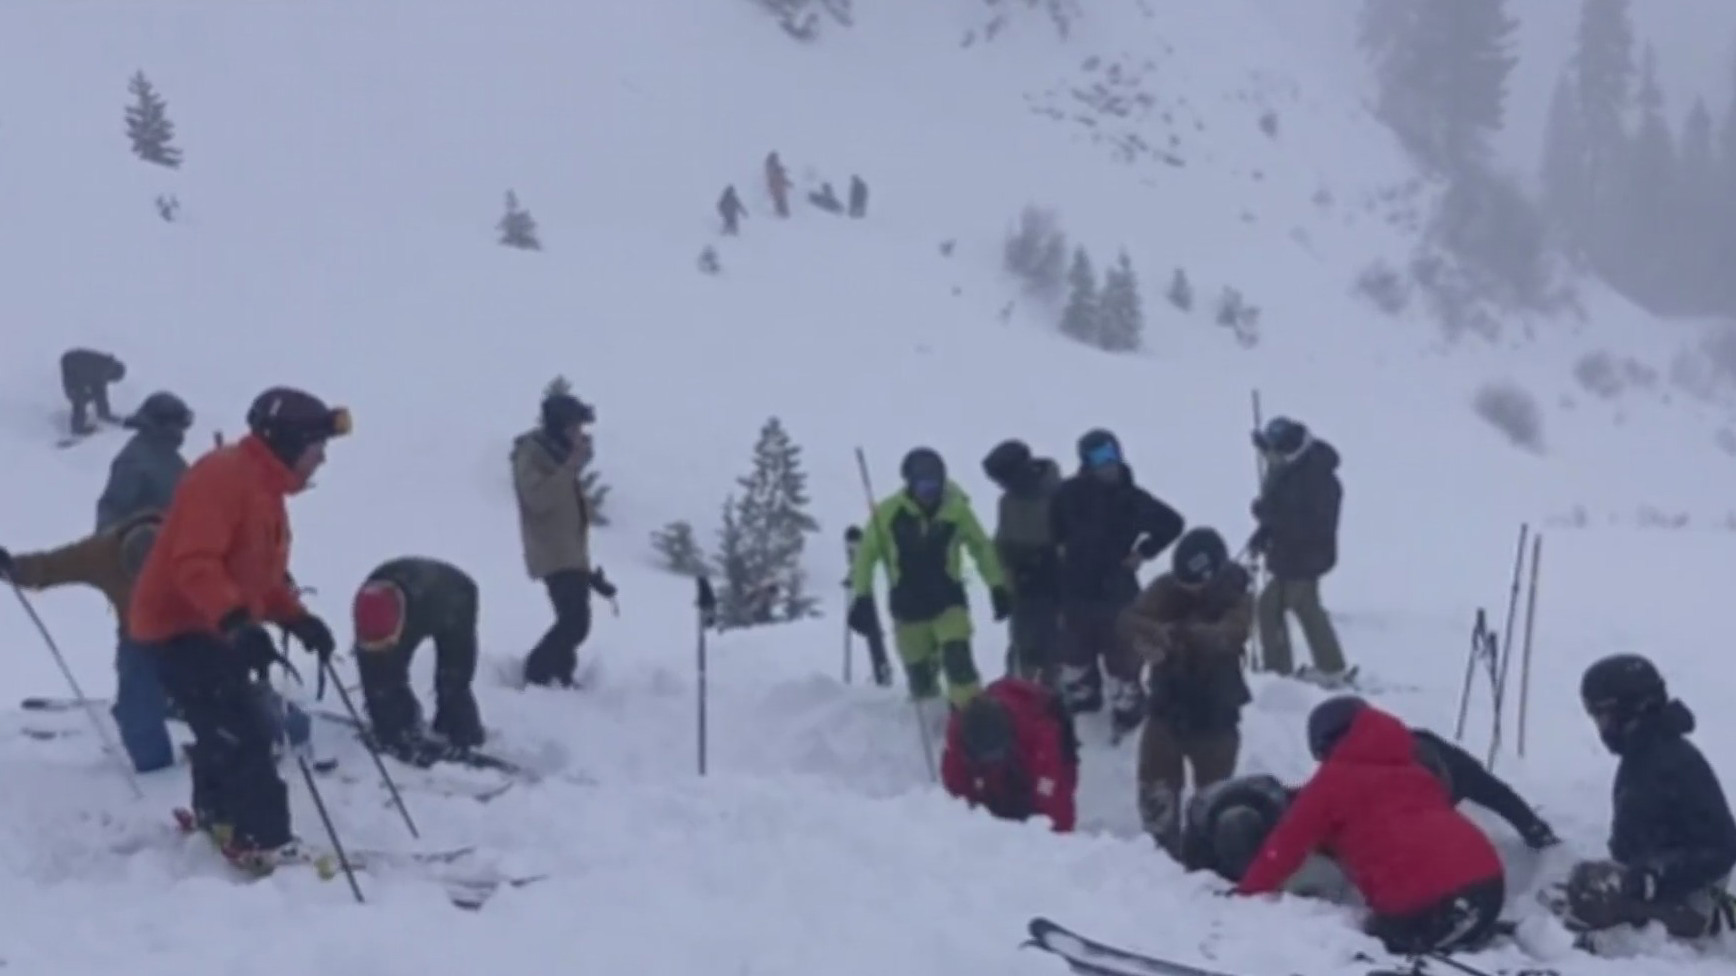 Palisades Tahoe areas still closed following deadly avalanche